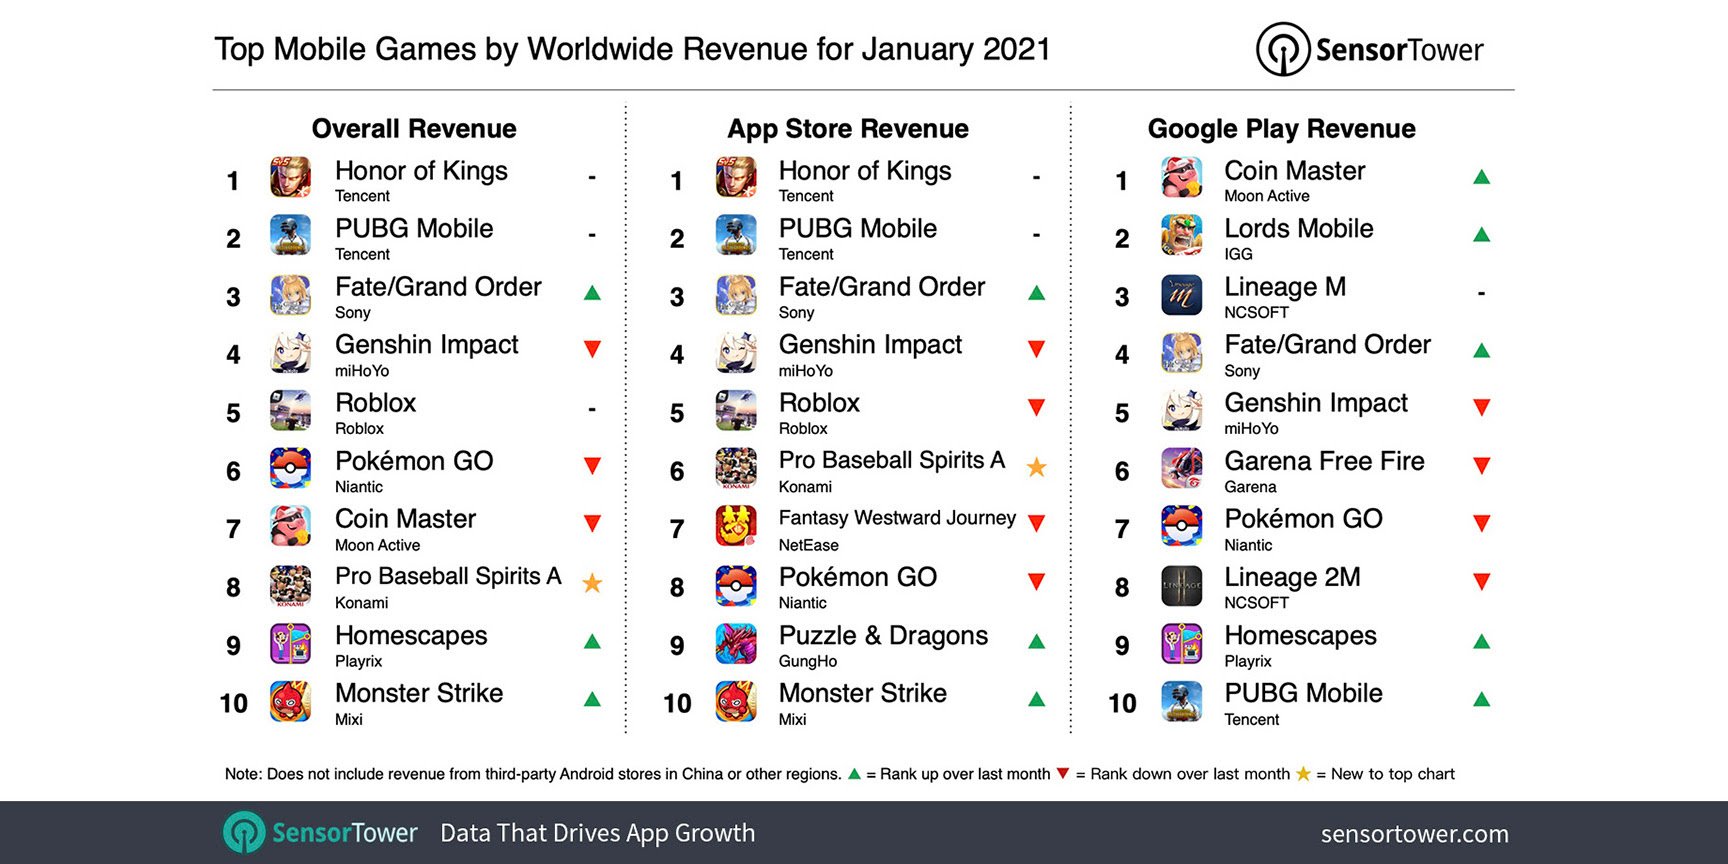 Honor of Kings Retains Top Spot as World's Highest-Earning Mobile Game -  Caixin Global